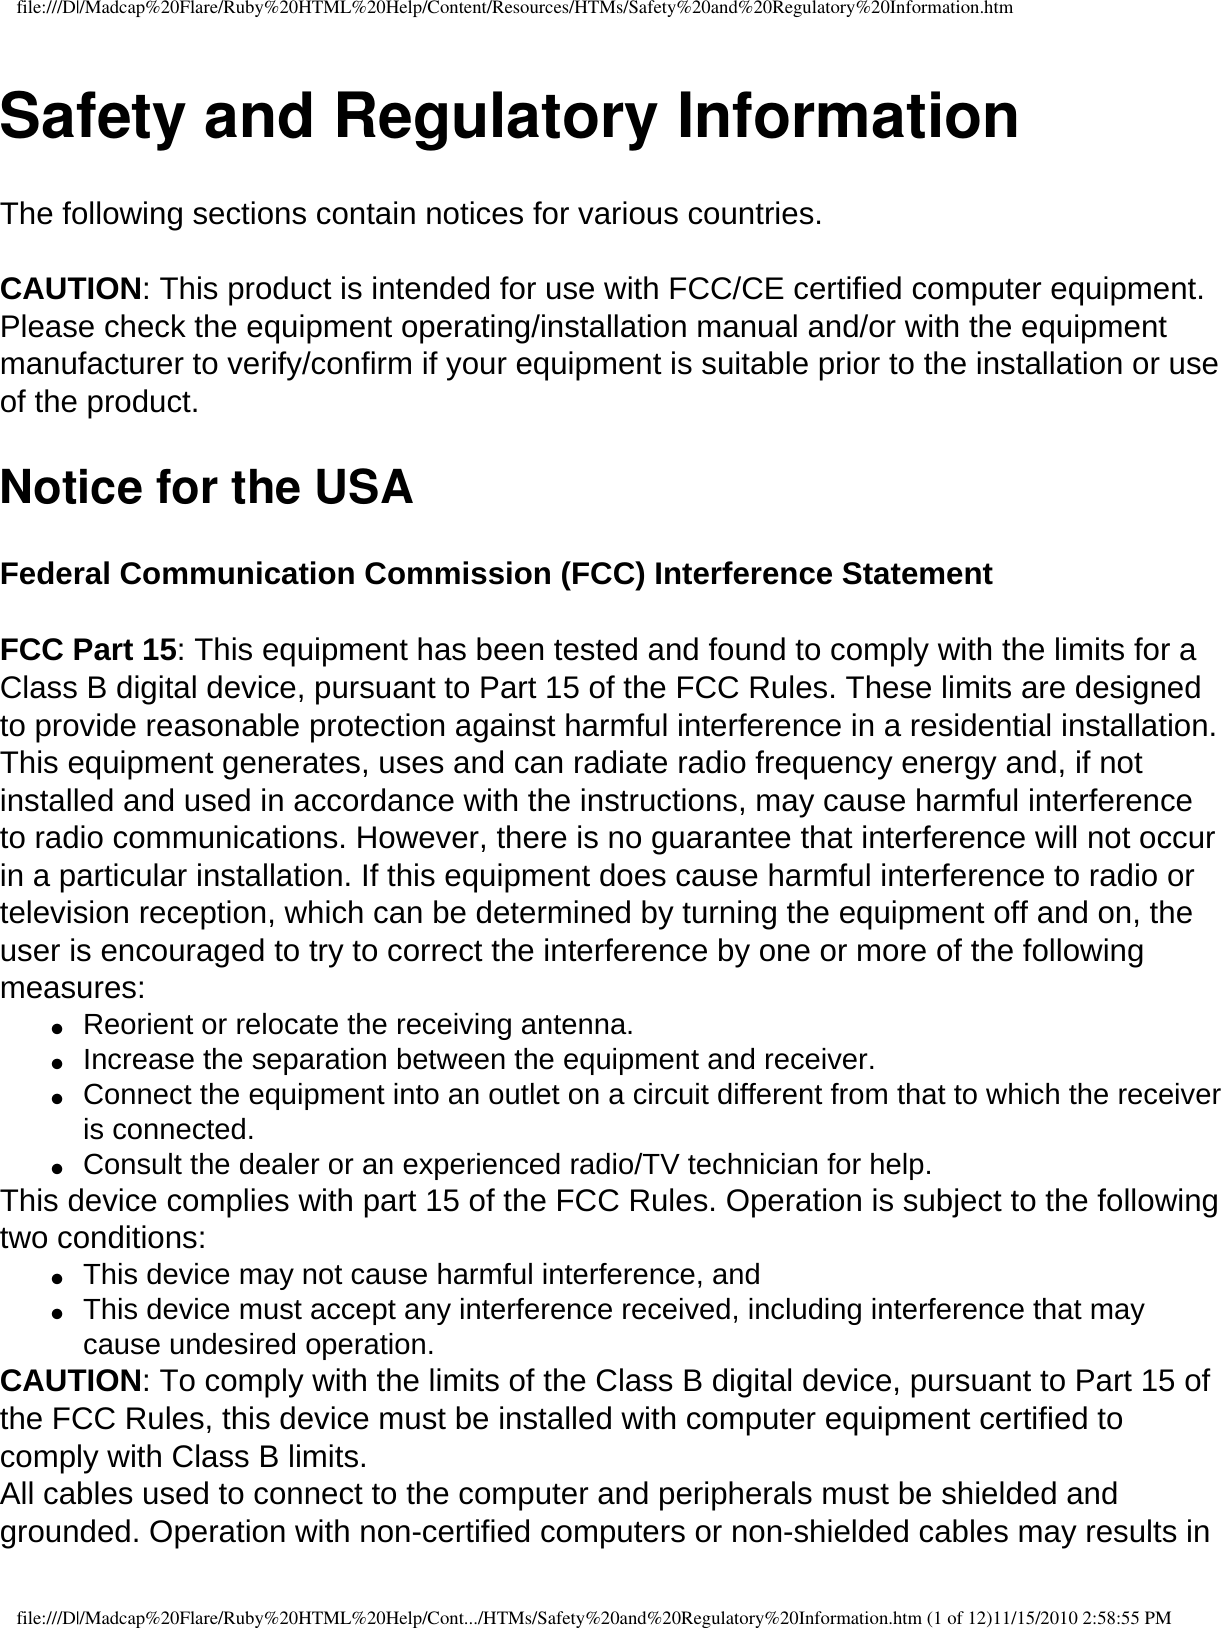 file:///D|/Madcap%20Flare/Ruby%20HTML%20Help/Content/Resources/HTMs/Safety%20and%20Regulatory%20Information.htmSafety and Regulatory InformationThe following sections contain notices for various countries.  CAUTION: This product is intended for use with FCC/CE certified computer equipment. Please check the equipment operating/installation manual and/or with the equipment manufacturer to verify/confirm if your equipment is suitable prior to the installation or use of the product.Notice for the USAFederal Communication Commission (FCC) Interference Statement  FCC Part 15: This equipment has been tested and found to comply with the limits for a Class B digital device, pursuant to Part 15 of the FCC Rules. These limits are designed to provide reasonable protection against harmful interference in a residential installation. This equipment generates, uses and can radiate radio frequency energy and, if not installed and used in accordance with the instructions, may cause harmful interference to radio communications. However, there is no guarantee that interference will not occur in a particular installation. If this equipment does cause harmful interference to radio or television reception, which can be determined by turning the equipment off and on, the user is encouraged to try to correct the interference by one or more of the following measures: ●     Reorient or relocate the receiving antenna. ●     Increase the separation between the equipment and receiver. ●     Connect the equipment into an outlet on a circuit different from that to which the receiver is connected. ●     Consult the dealer or an experienced radio/TV technician for help. This device complies with part 15 of the FCC Rules. Operation is subject to the following two conditions: ●     This device may not cause harmful interference, and ●     This device must accept any interference received, including interference that may cause undesired operation. CAUTION: To comply with the limits of the Class B digital device, pursuant to Part 15 of the FCC Rules, this device must be installed with computer equipment certified to comply with Class B limits. All cables used to connect to the computer and peripherals must be shielded and grounded. Operation with non-certified computers or non-shielded cables may results in file:///D|/Madcap%20Flare/Ruby%20HTML%20Help/Cont.../HTMs/Safety%20and%20Regulatory%20Information.htm (1 of 12)11/15/2010 2:58:55 PM